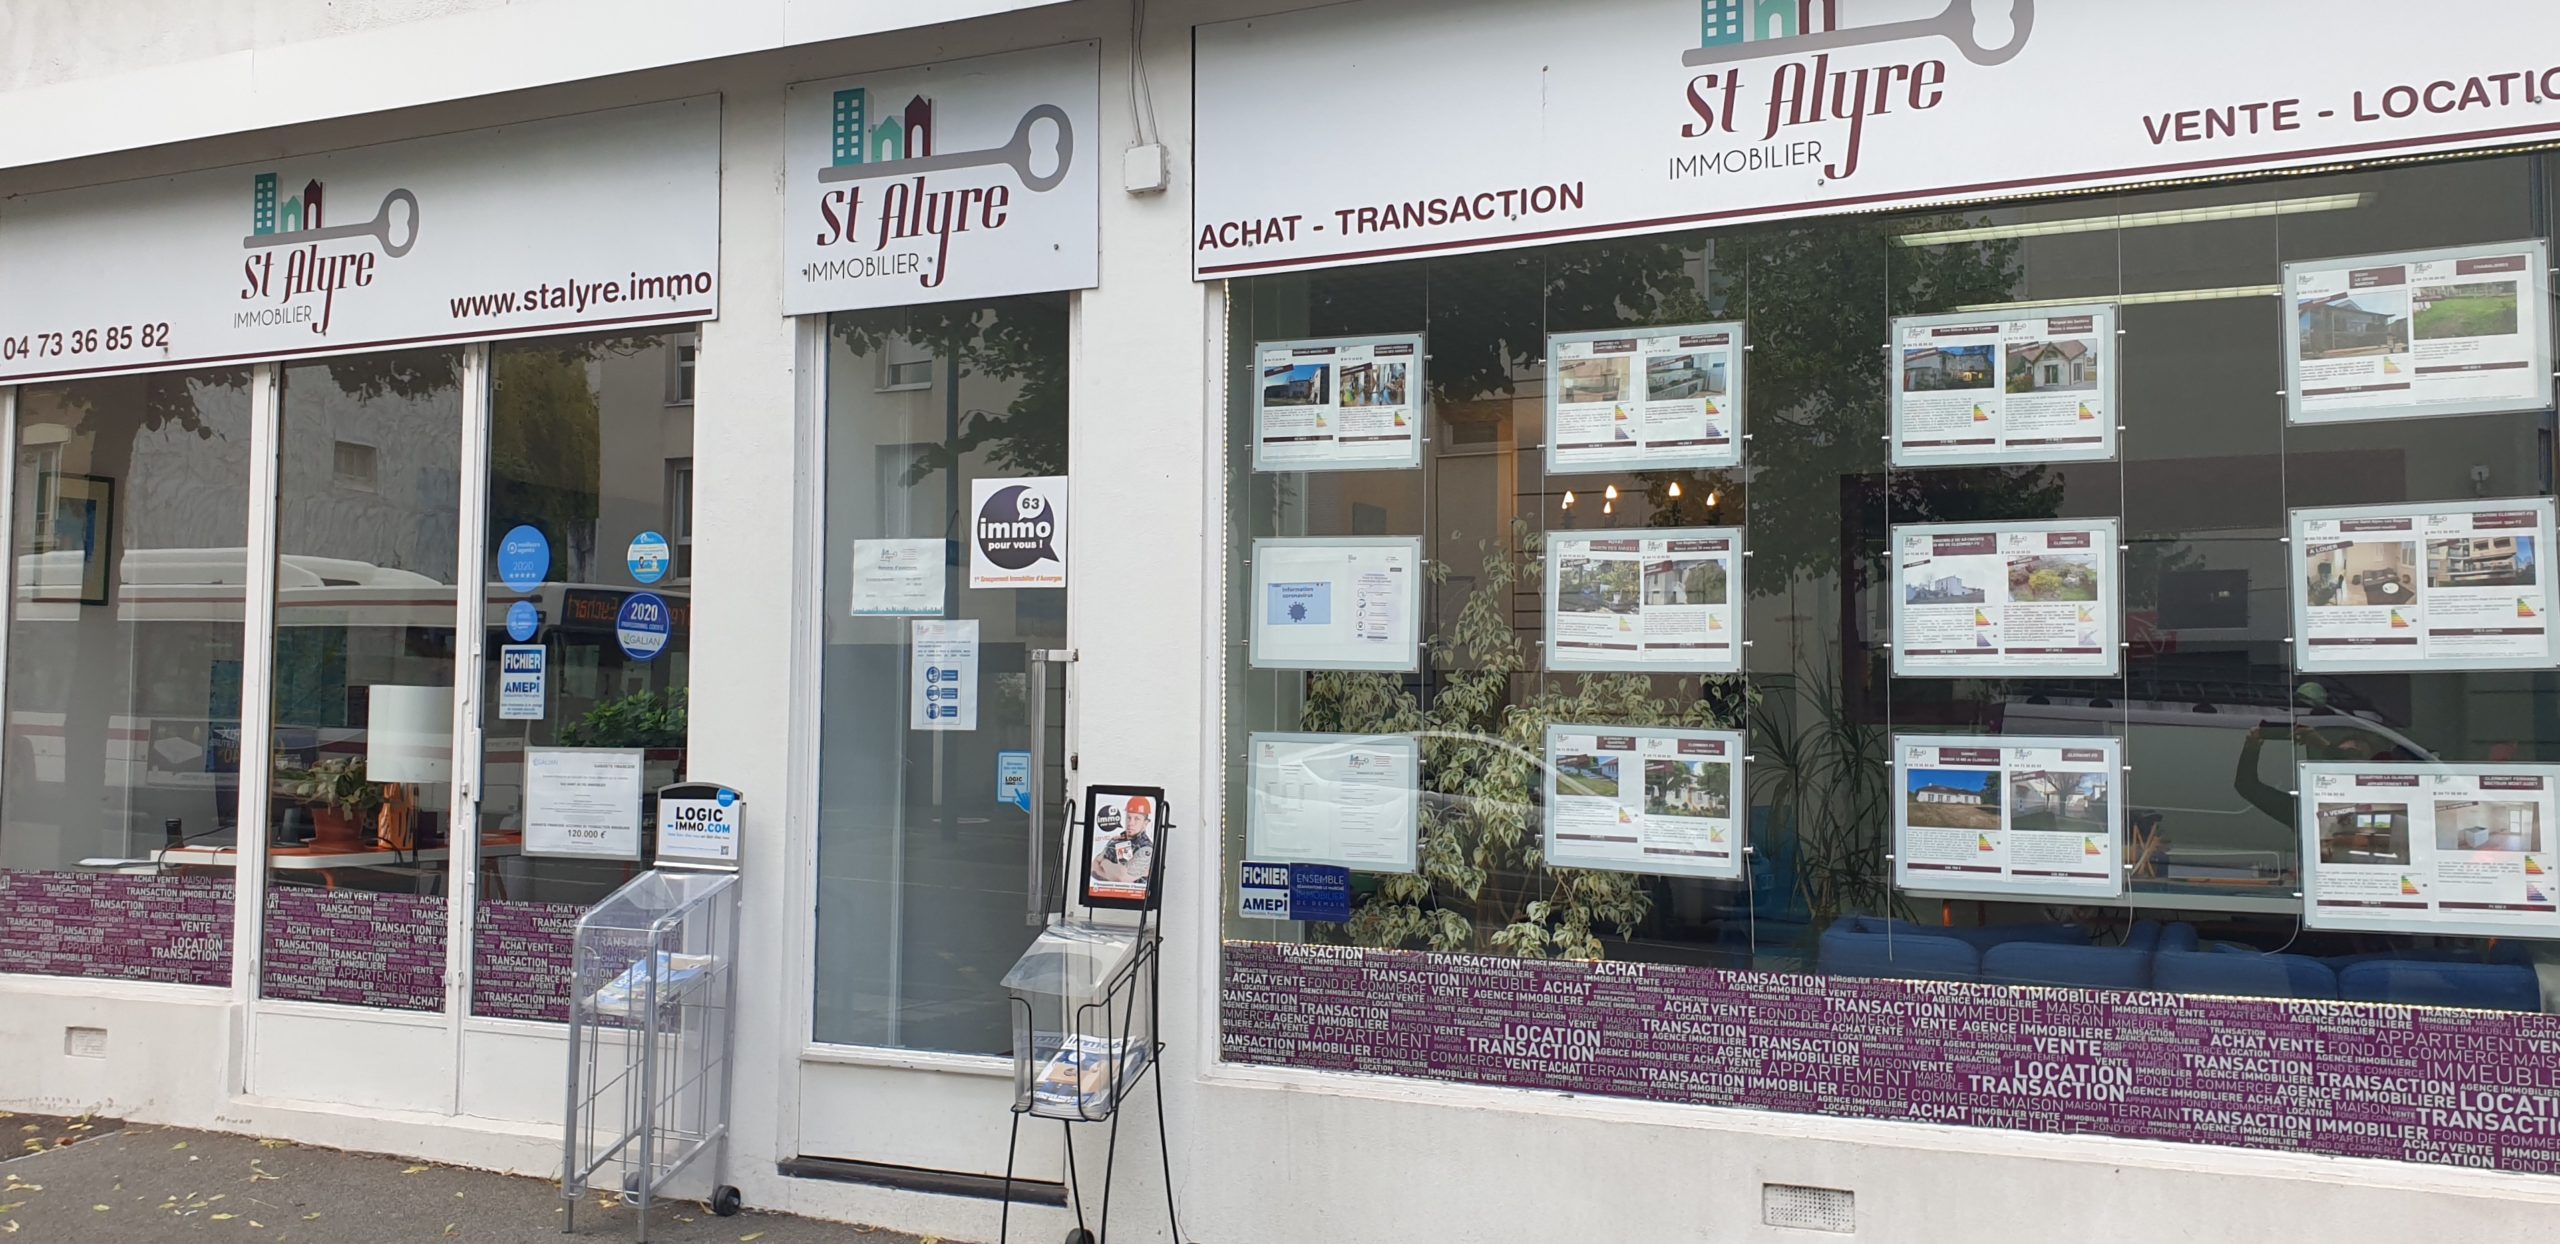 SAINT ALYRE IMMOBILIER